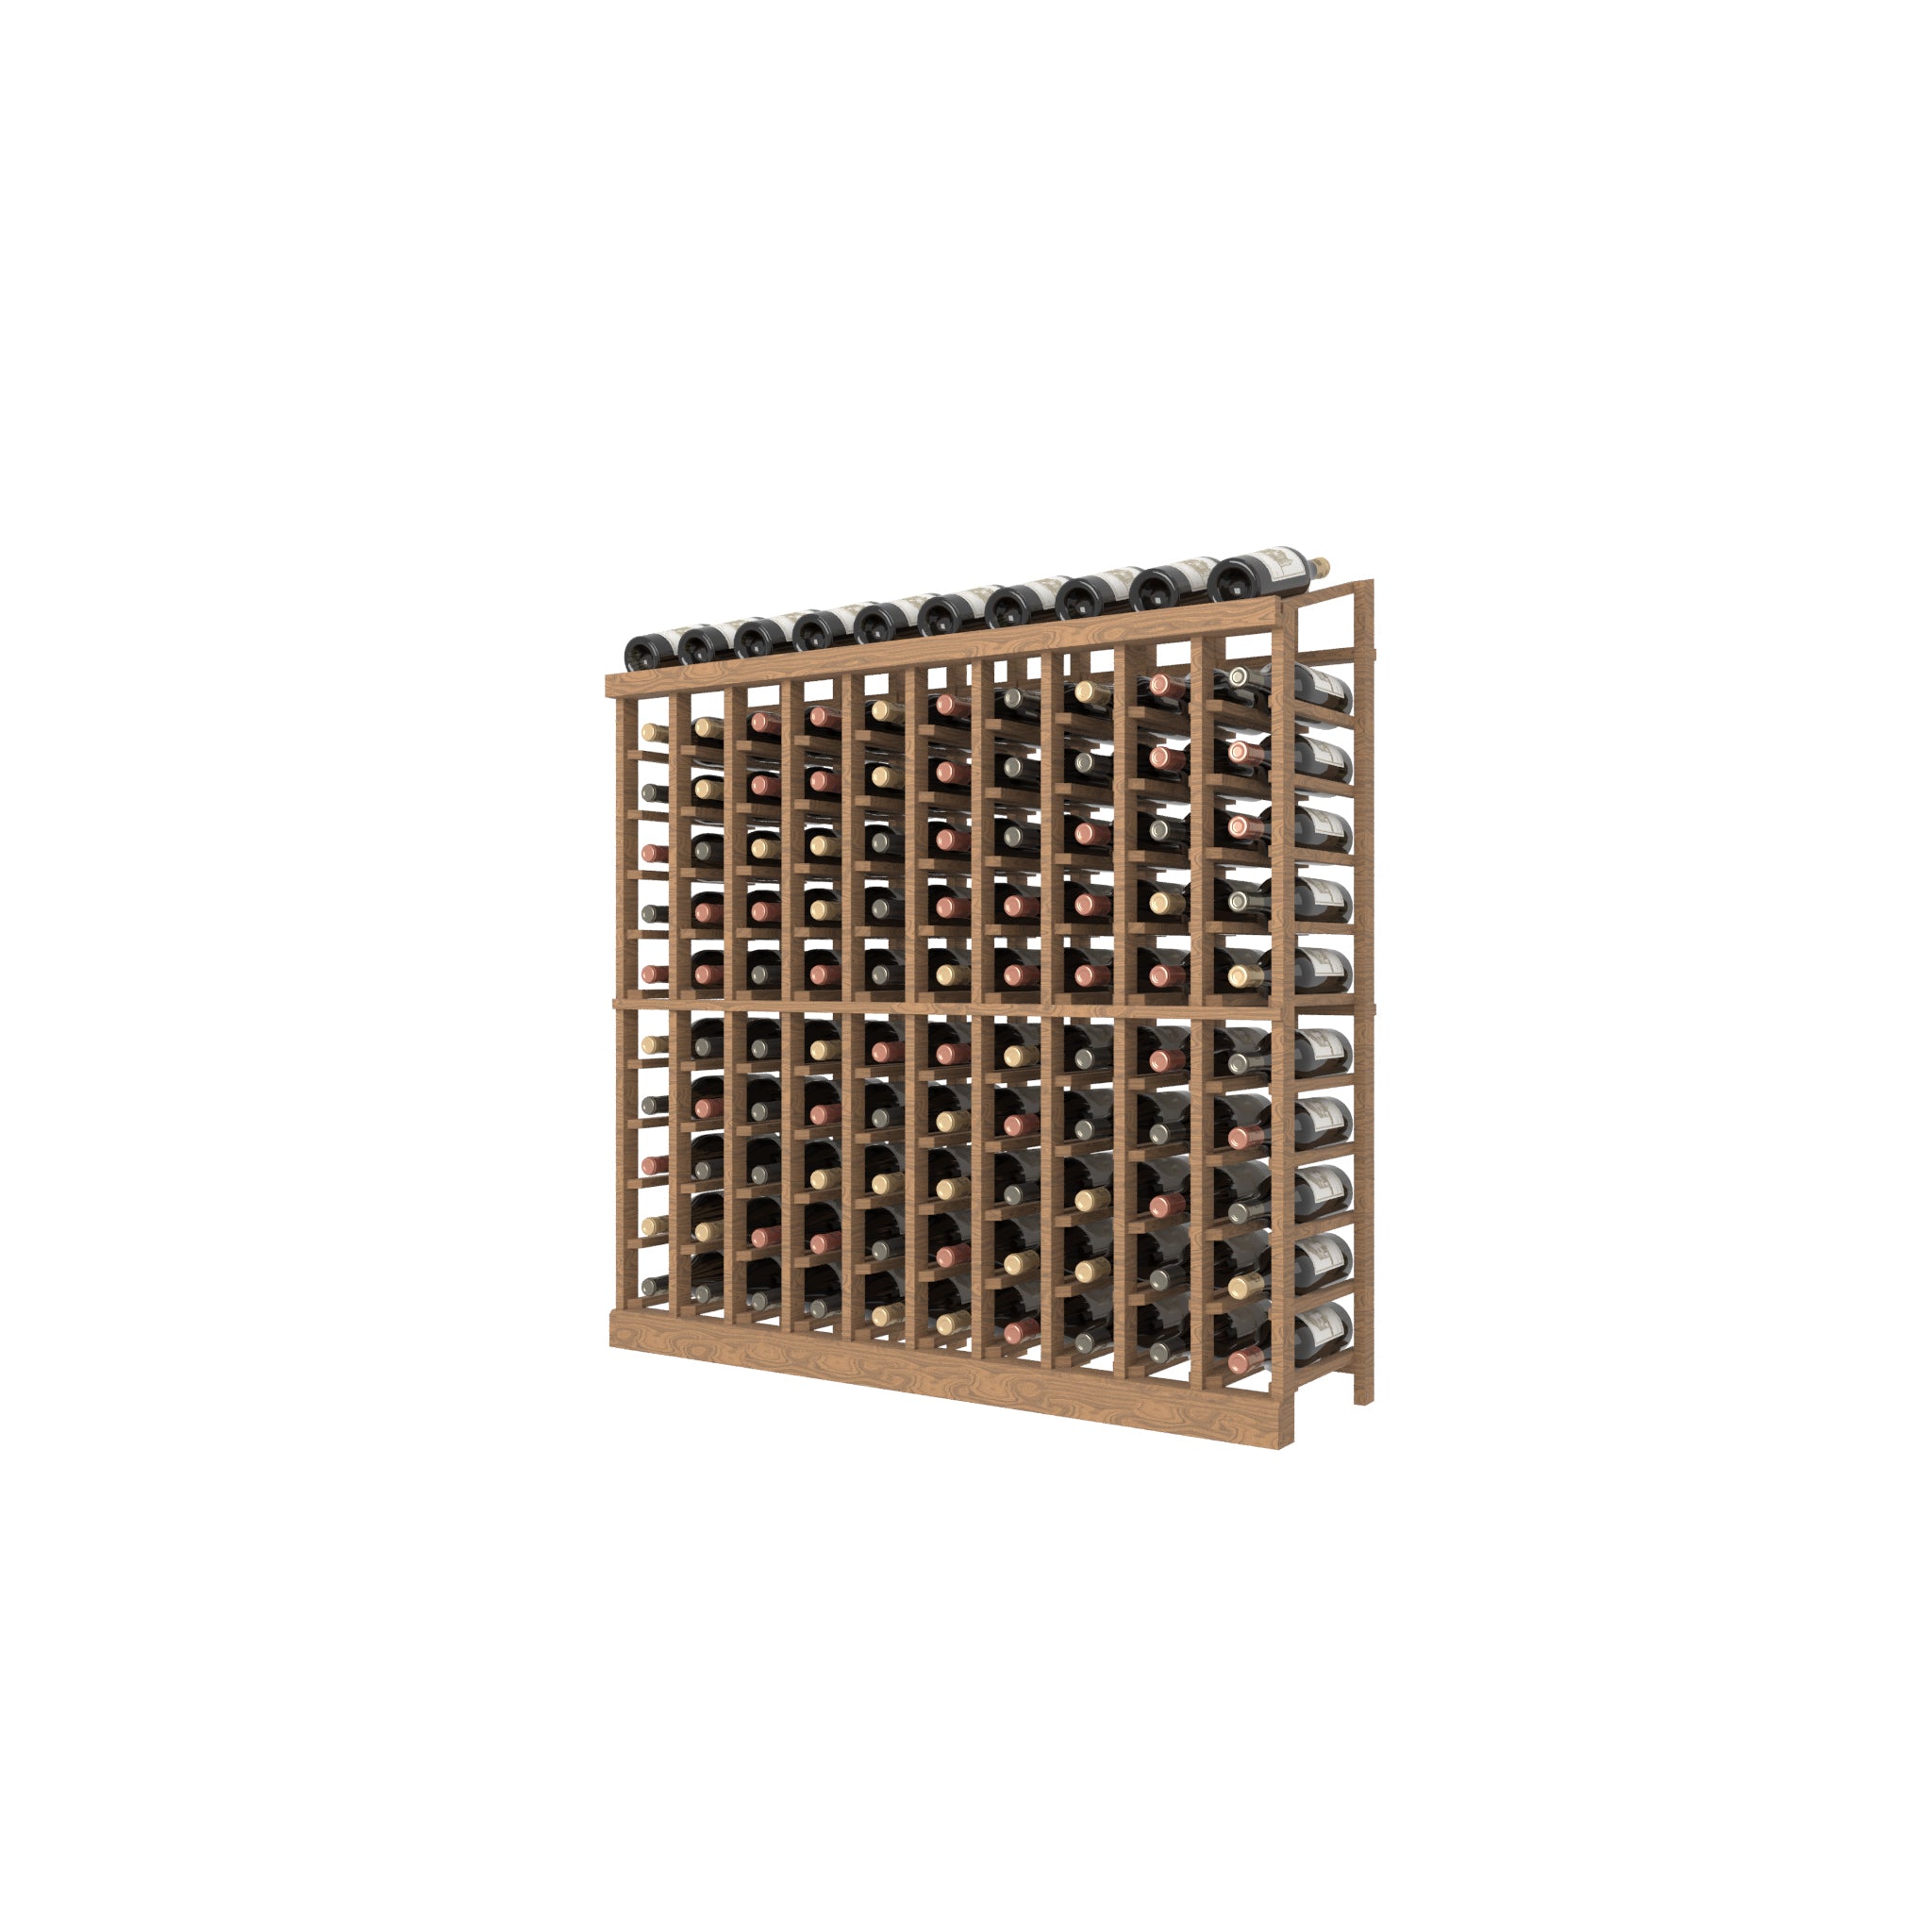 Individual bottle wood Wine Rack with a display row, 10 Column 11 rows